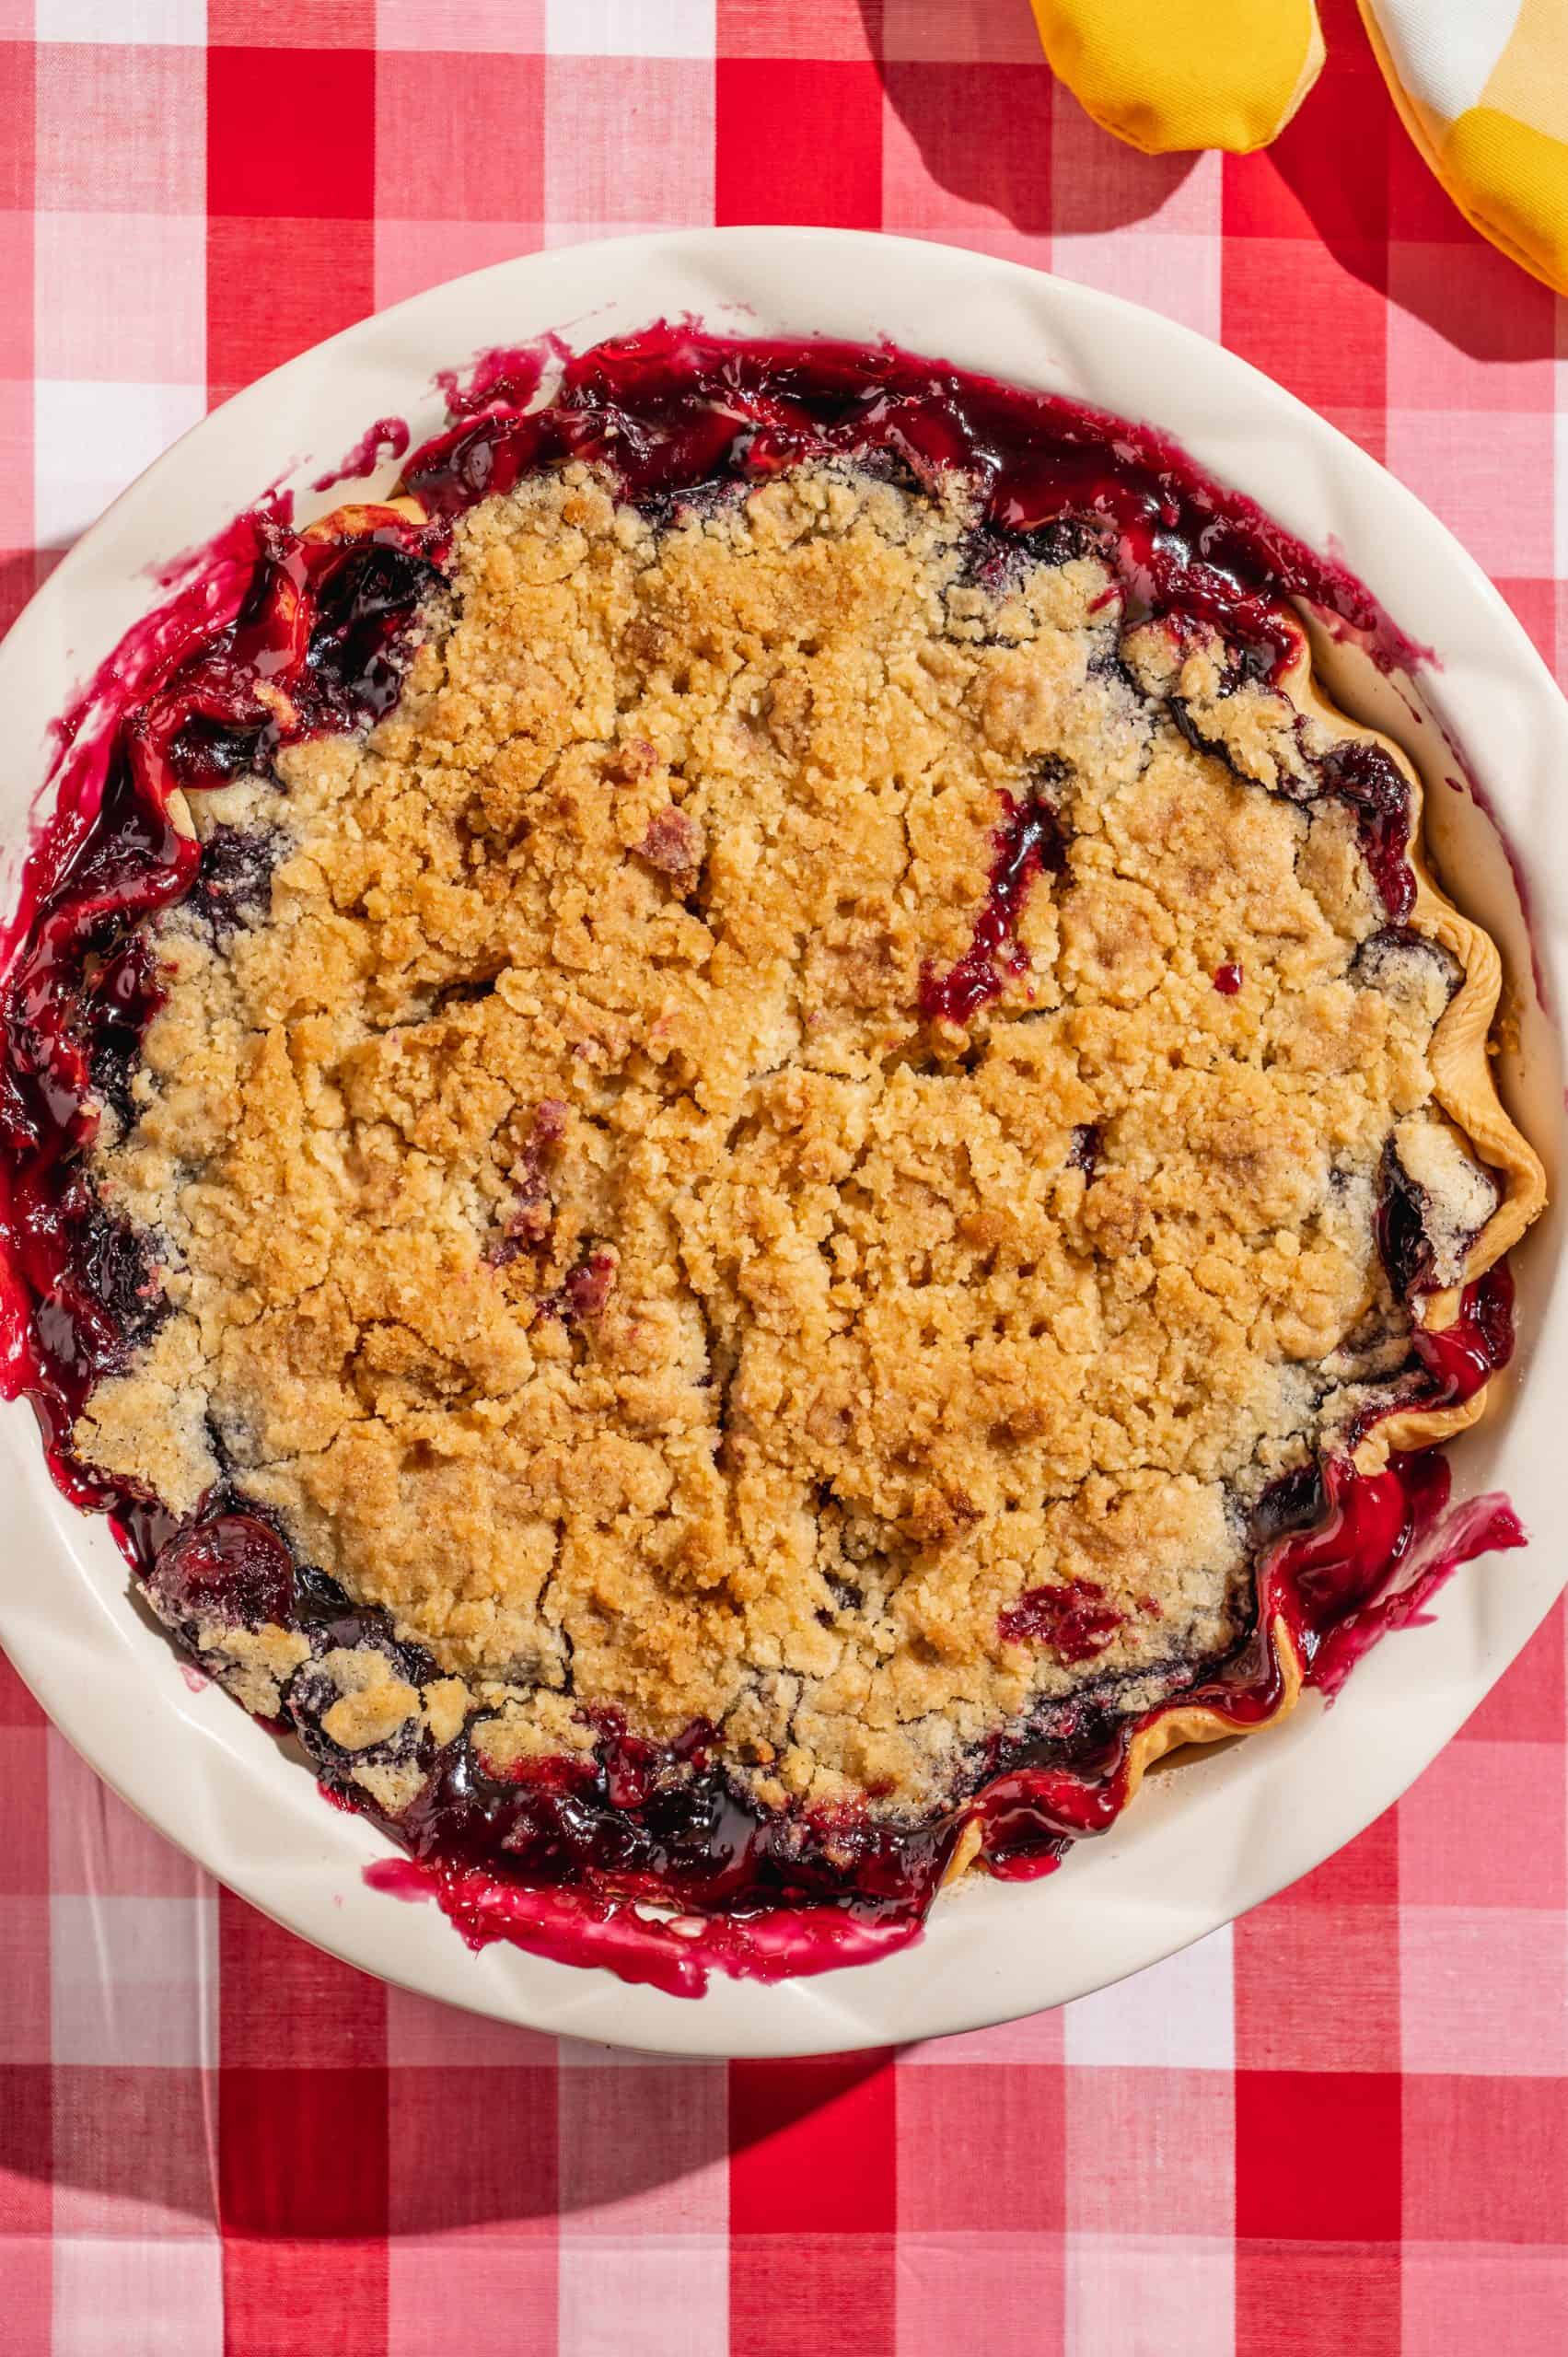 baked cherry pie with golden brown crumble topping and cherry filling oozing out the top